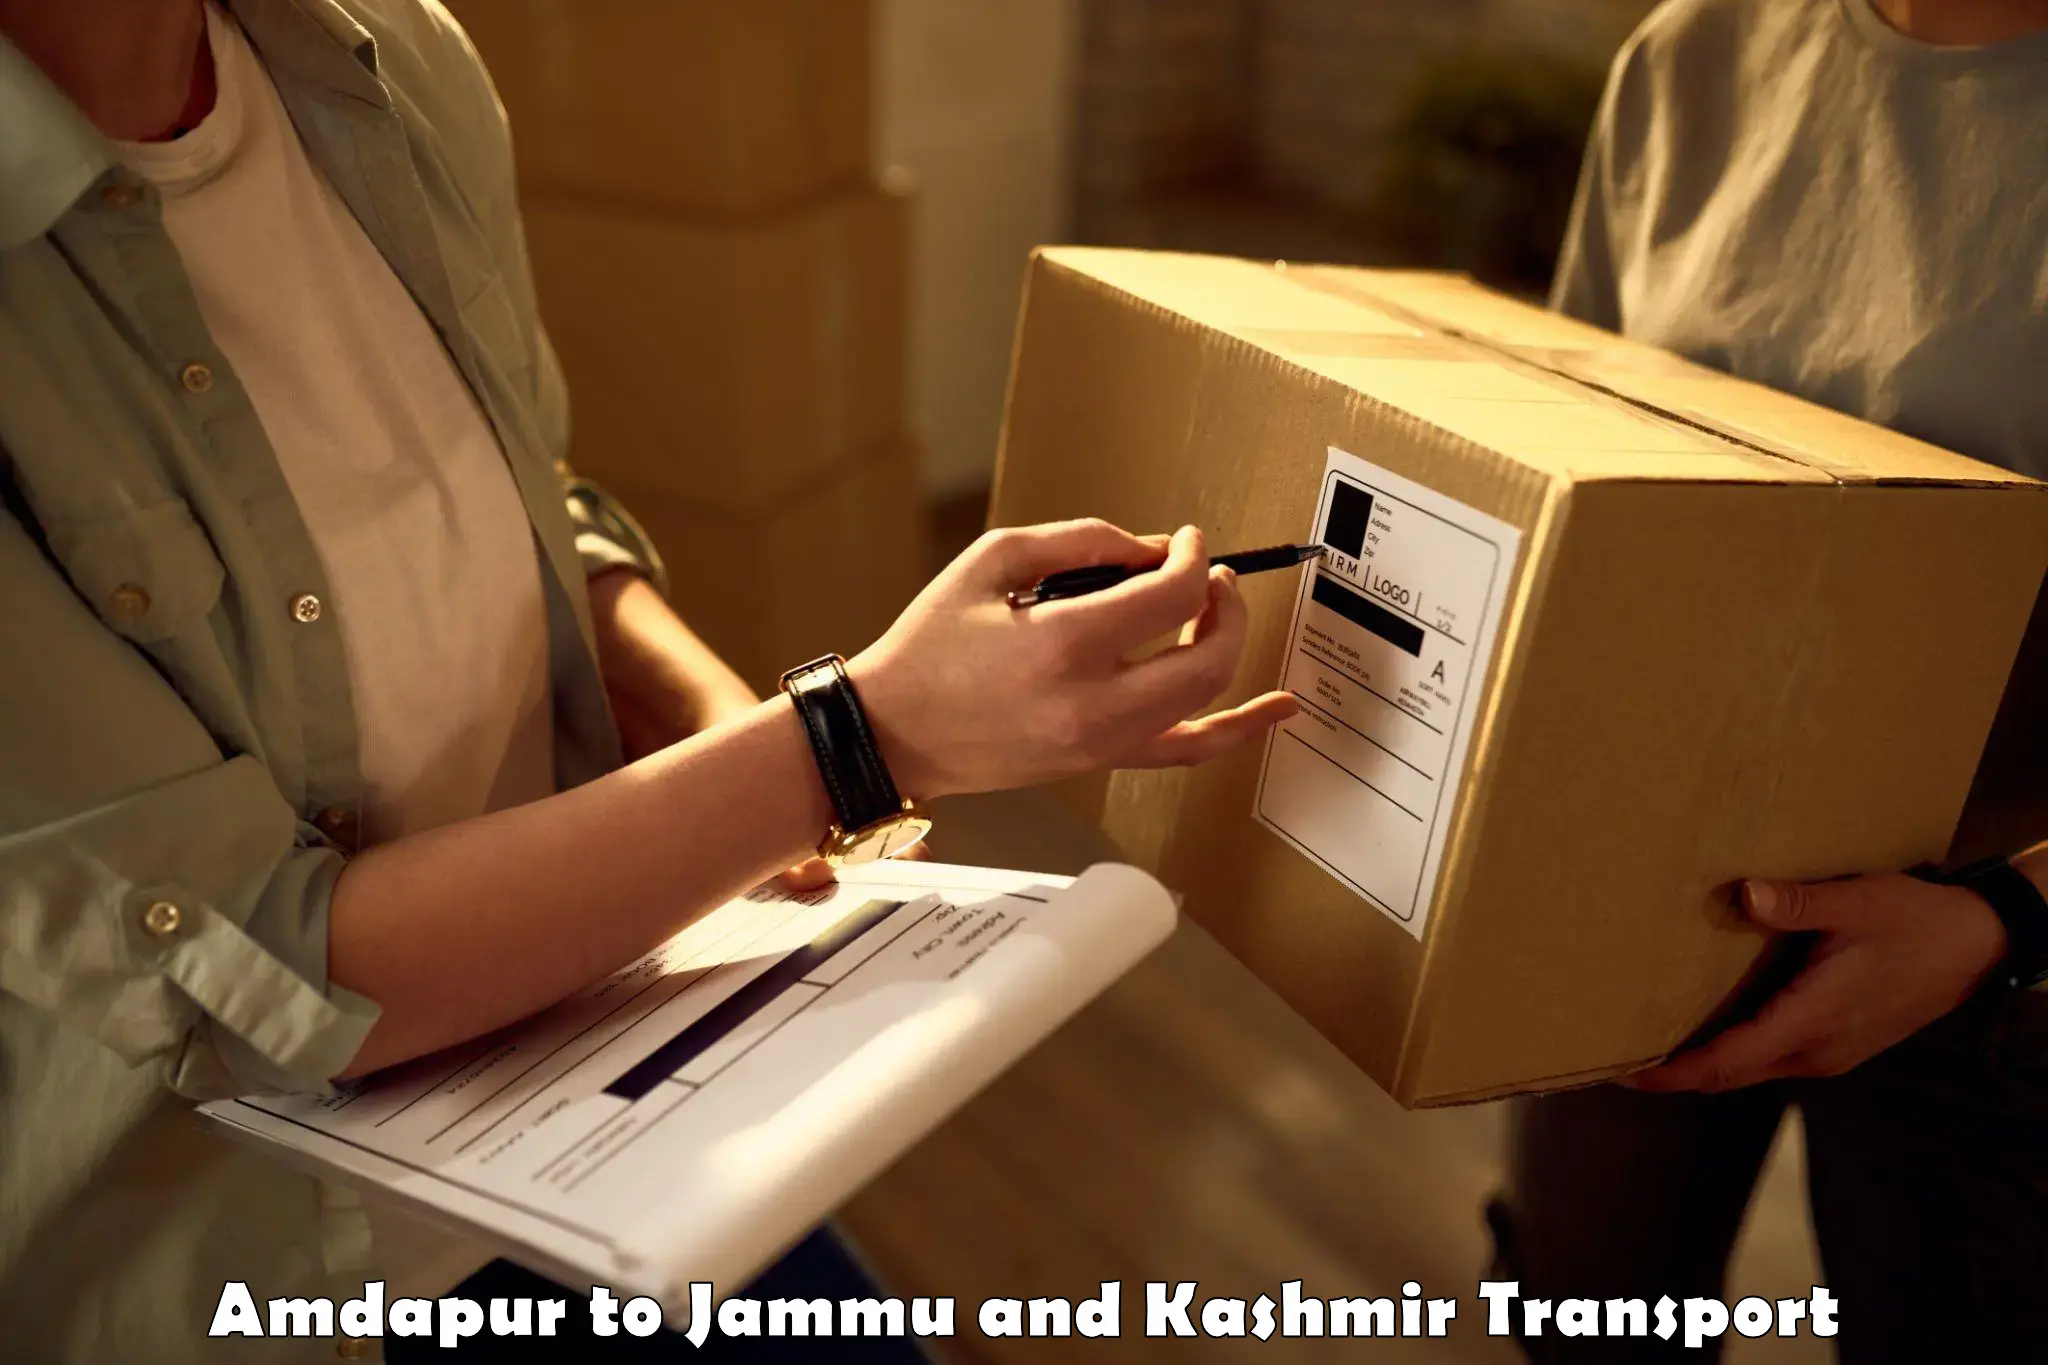 Delivery service Amdapur to Kargil